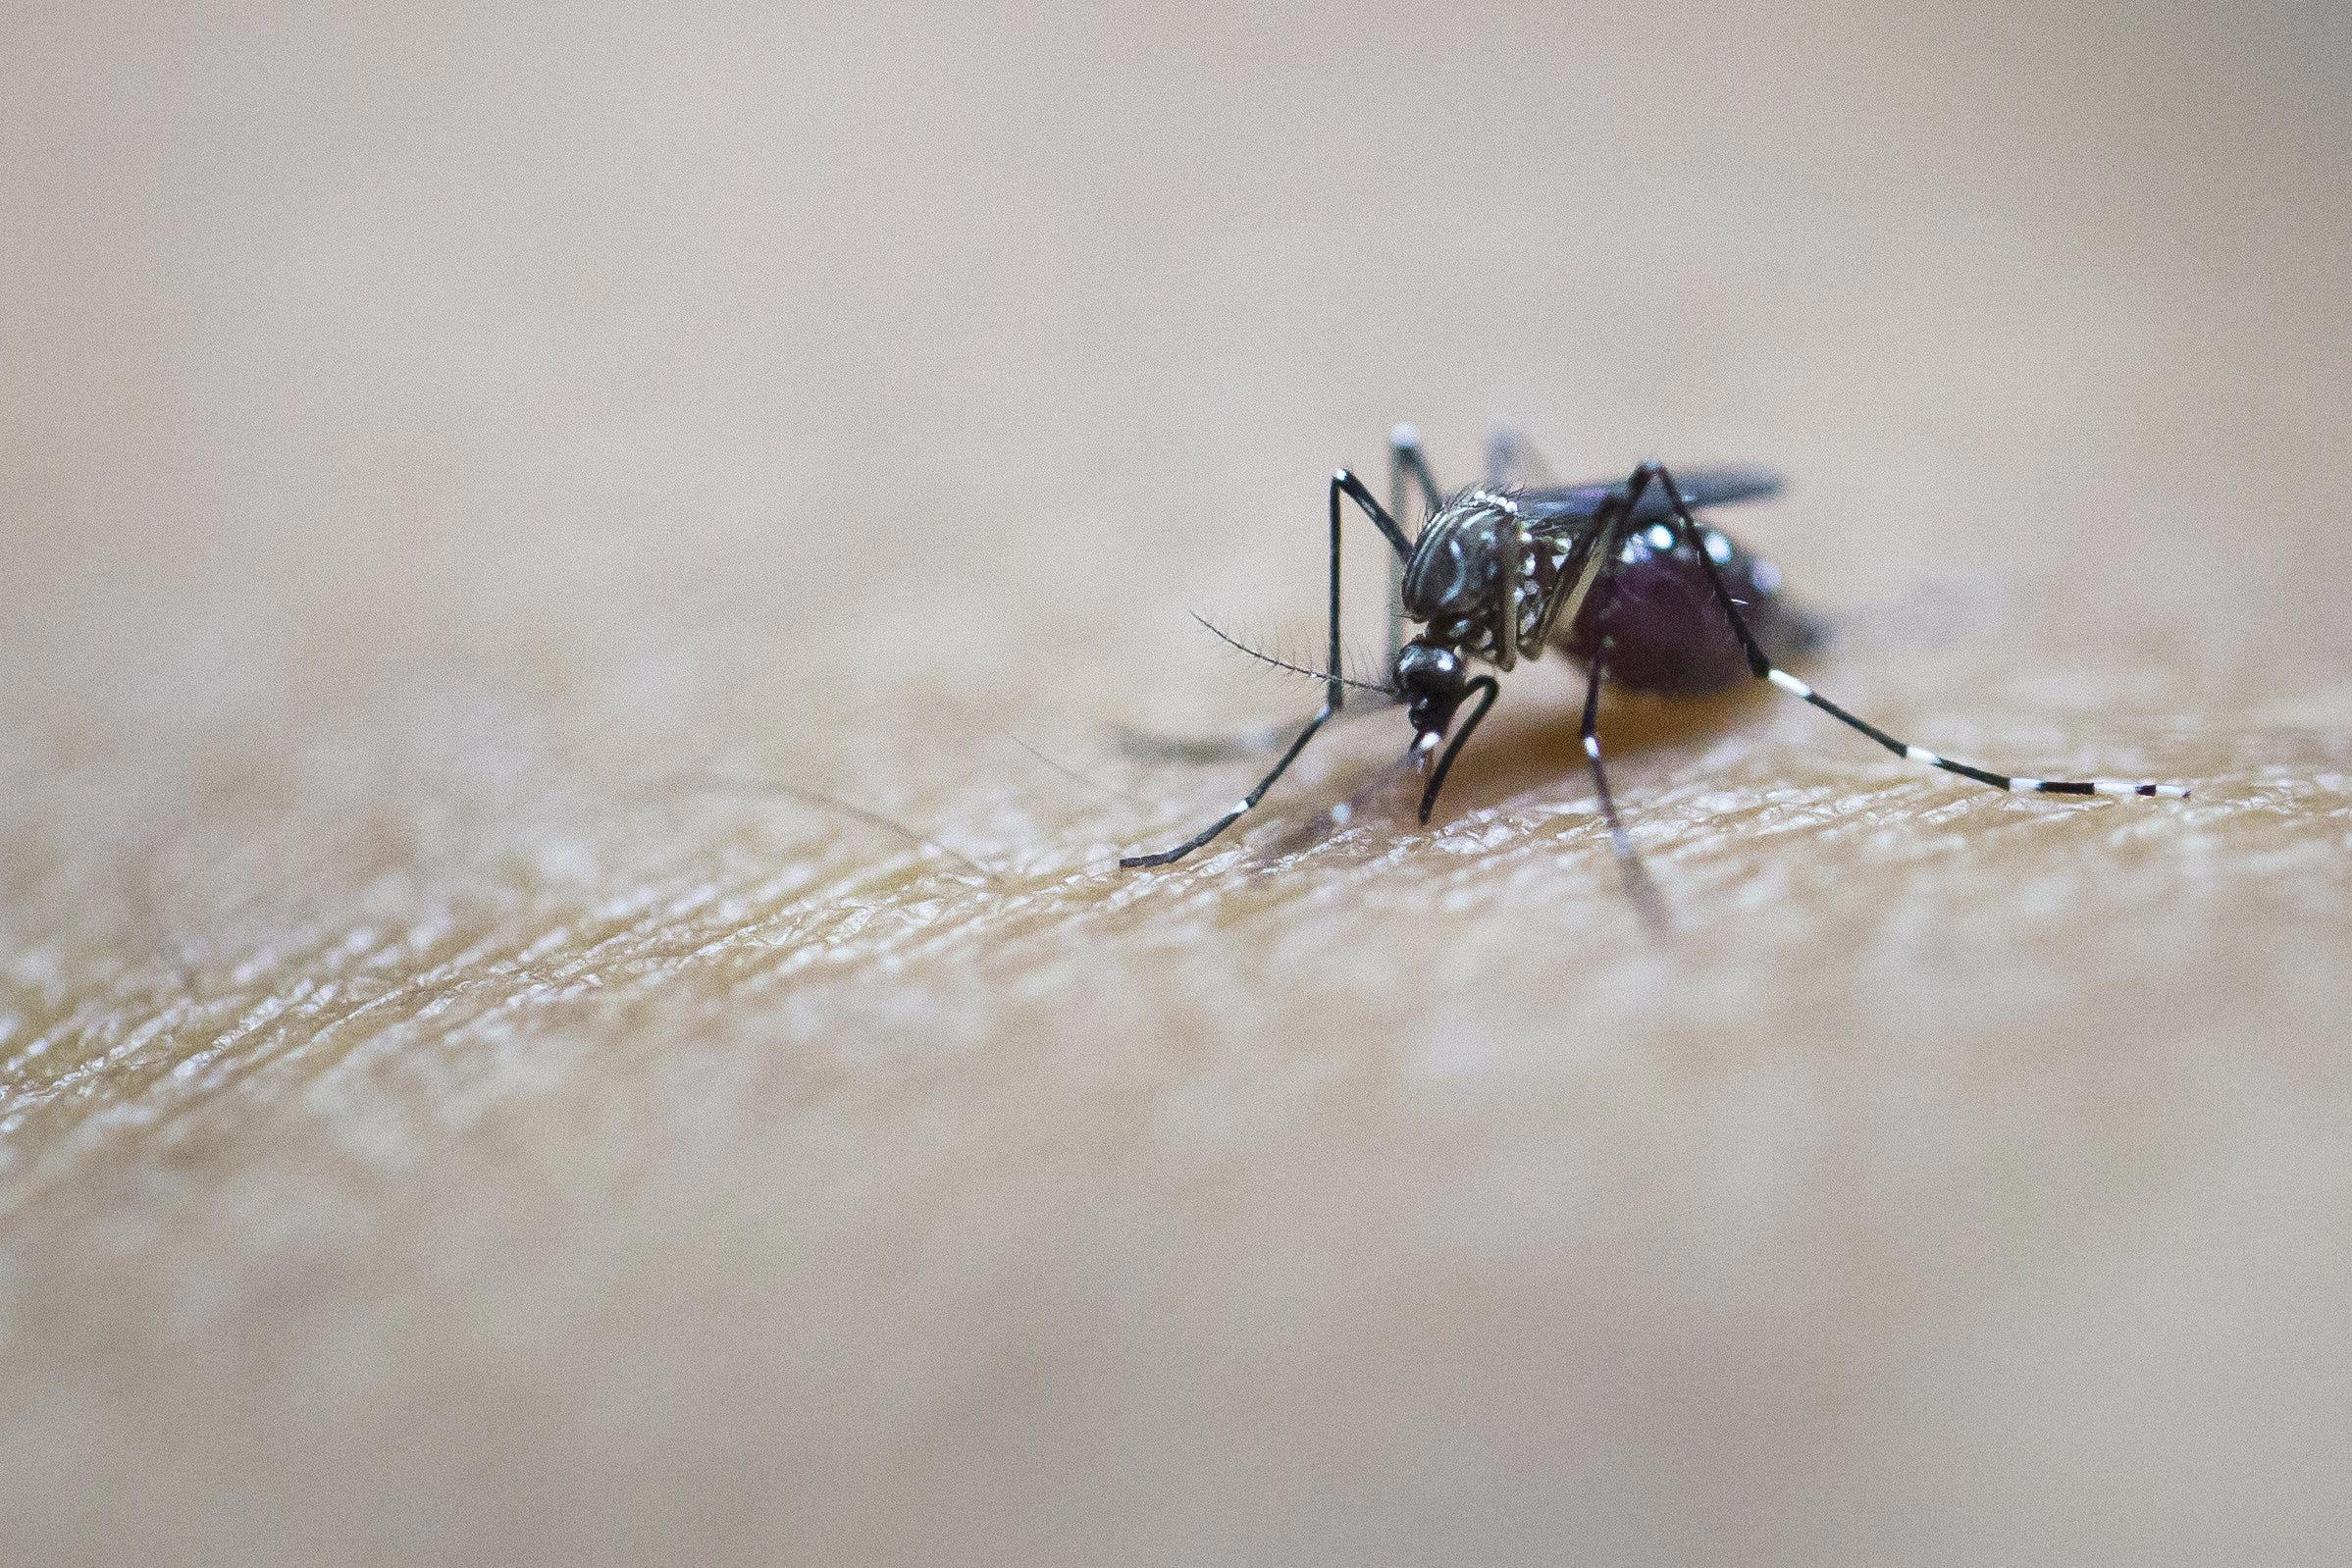 Fda Approves First Vaccine Against Chikungunya Virus For People Over 18